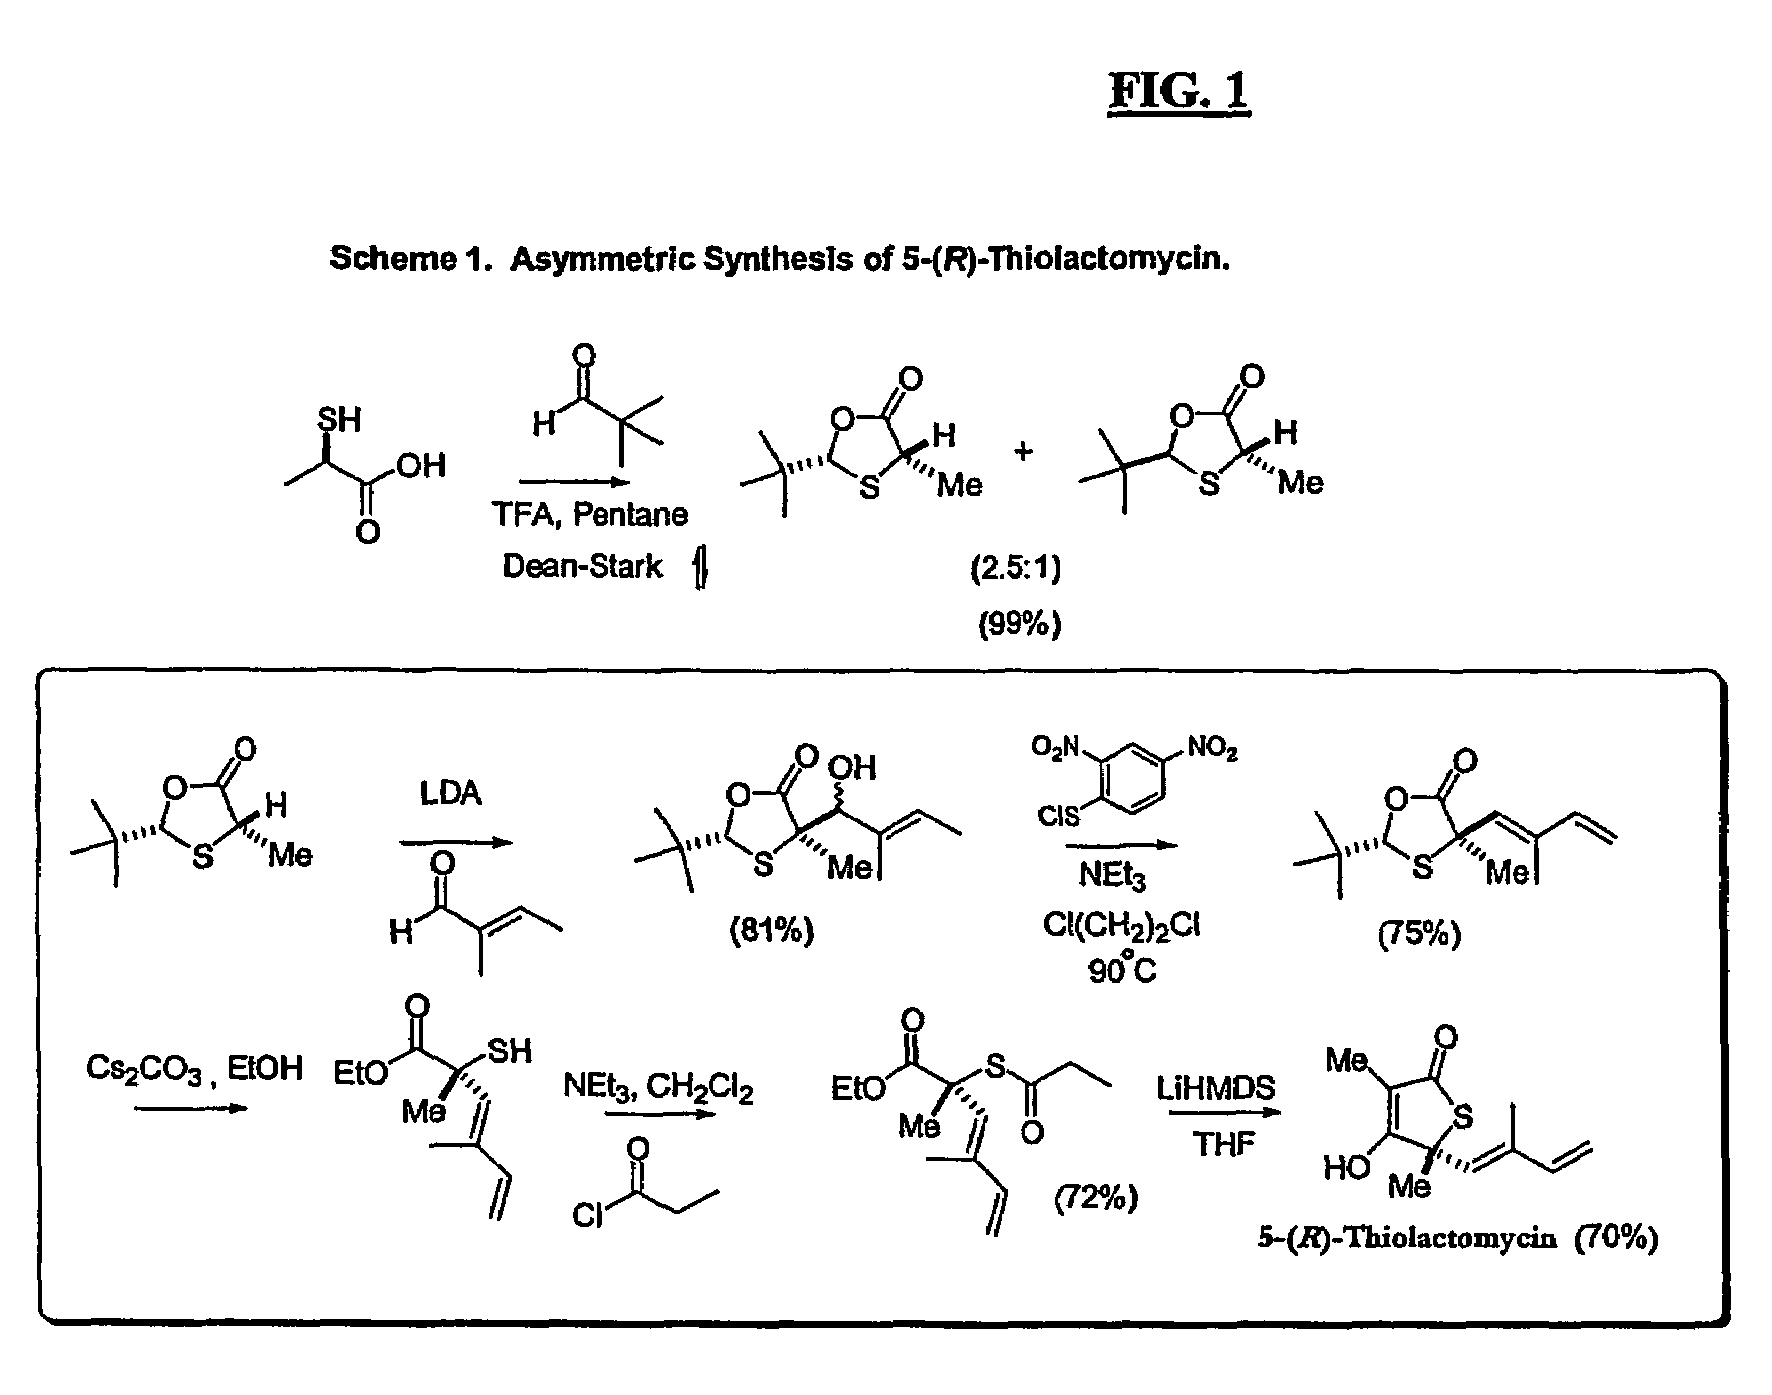 Compounds, pharmaceutical compositions containing same, and methods of use for same